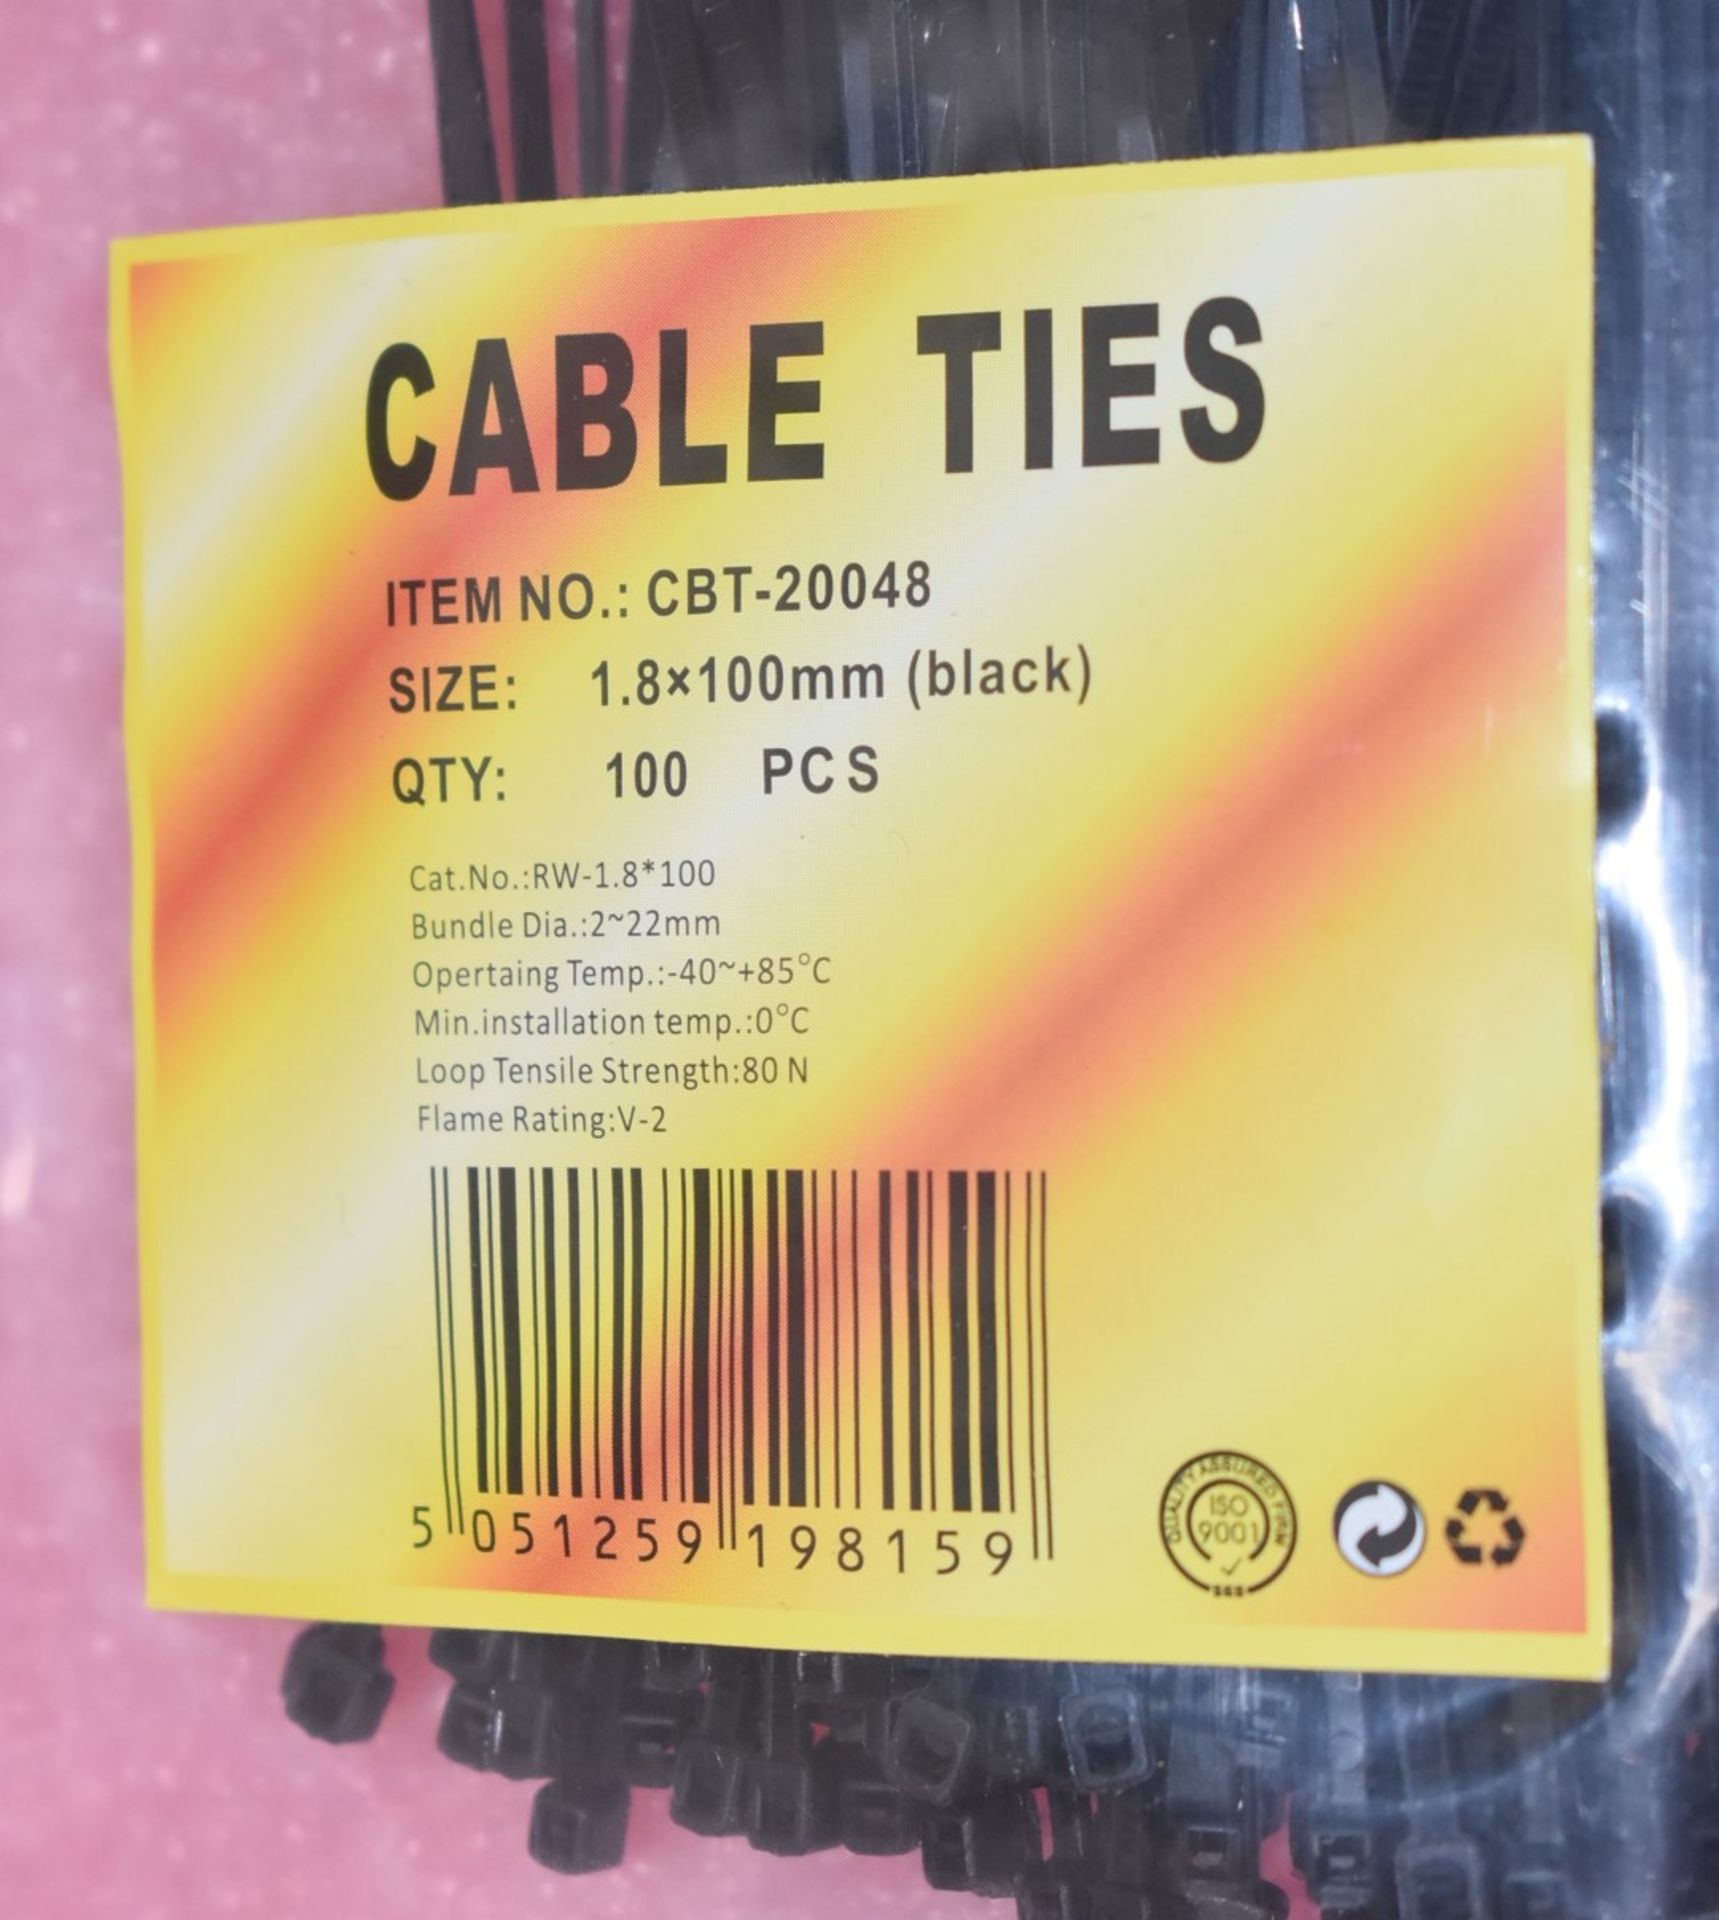 16,000 x Black Cable Ties - Includes 100 Packs of 100 Ties - Size: 1.8 x 100mm - Brand New Stock - Image 3 of 3